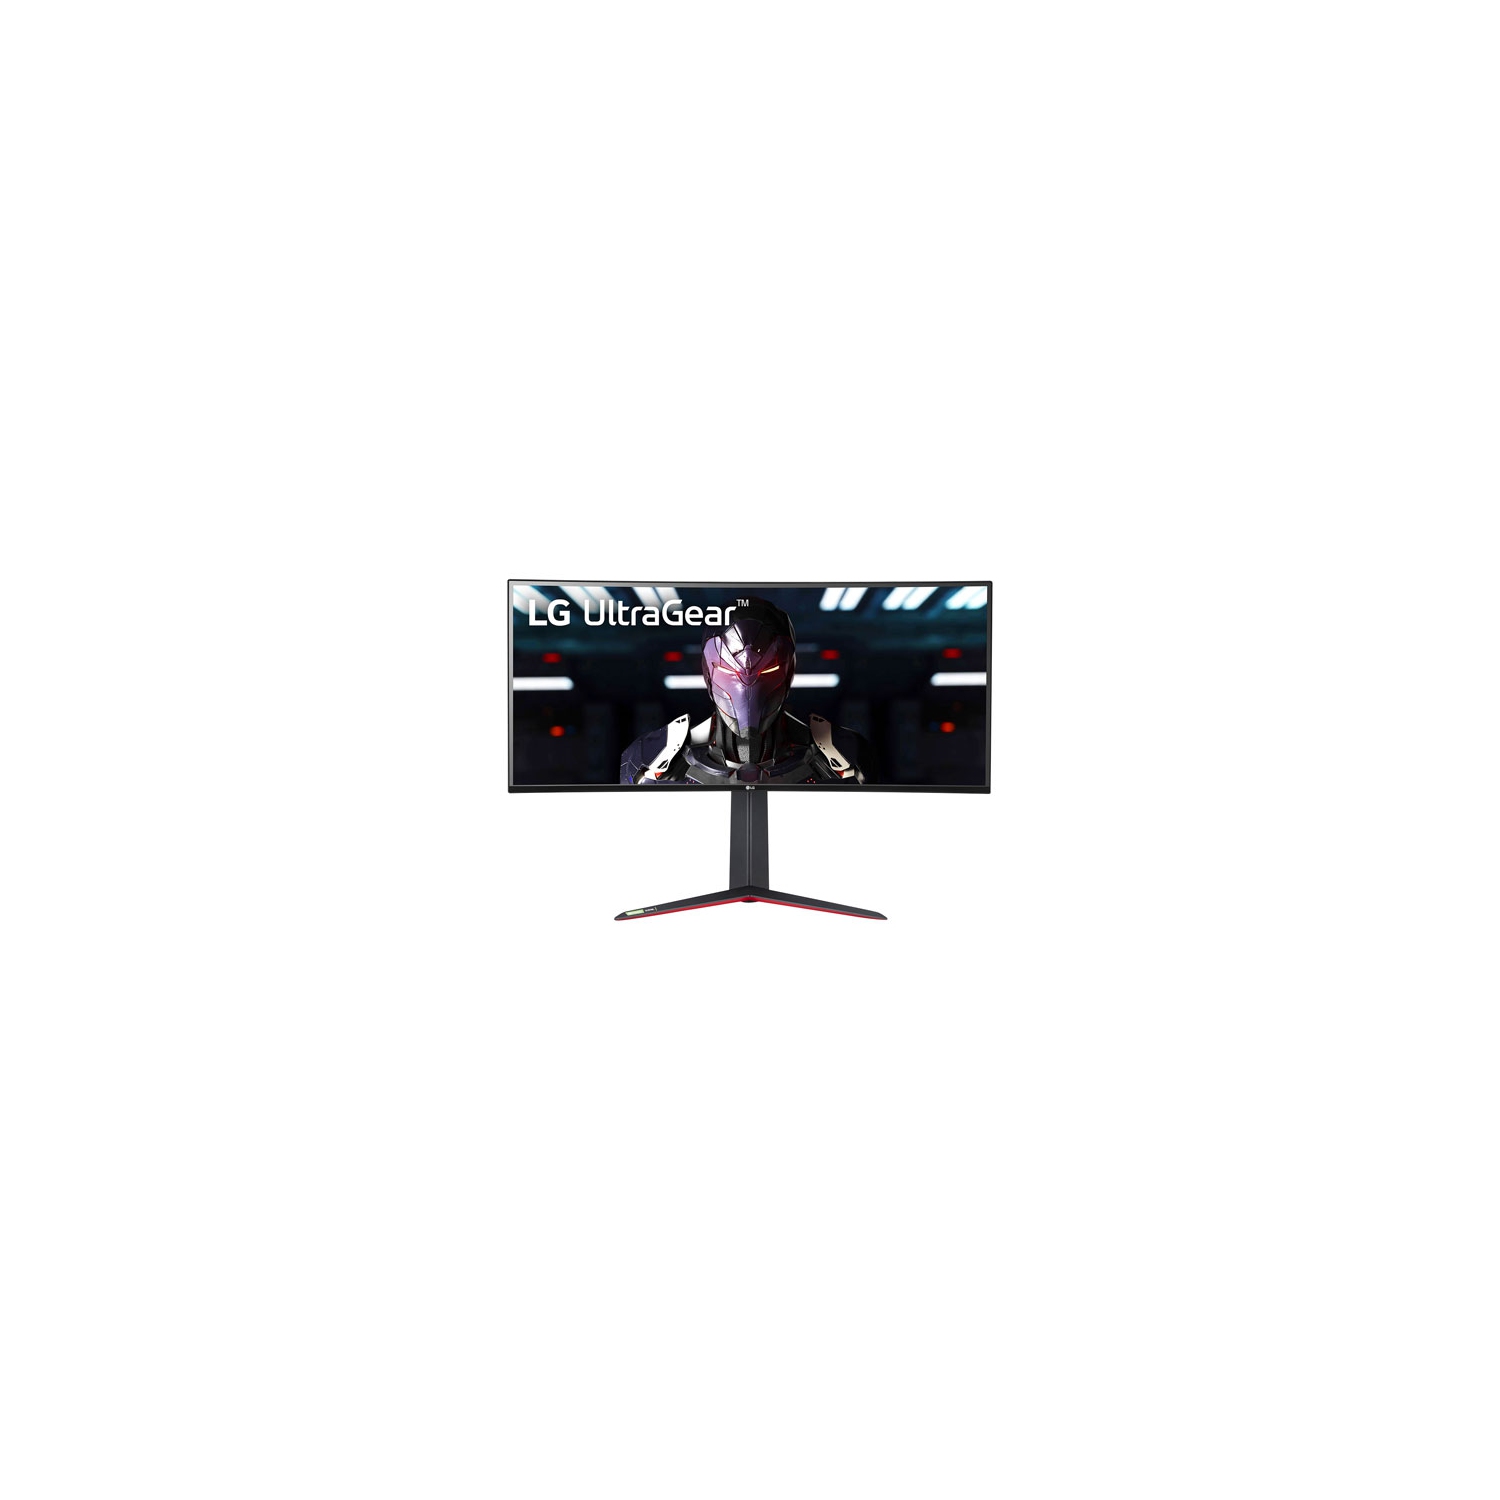 Refurbished (Excellent) - LG UltraGear 34" 1440p WQHD 144Hz 1ms GTG Curved IPS LED G-Sync FreeSync Gaming Monitor (34GN850-B)